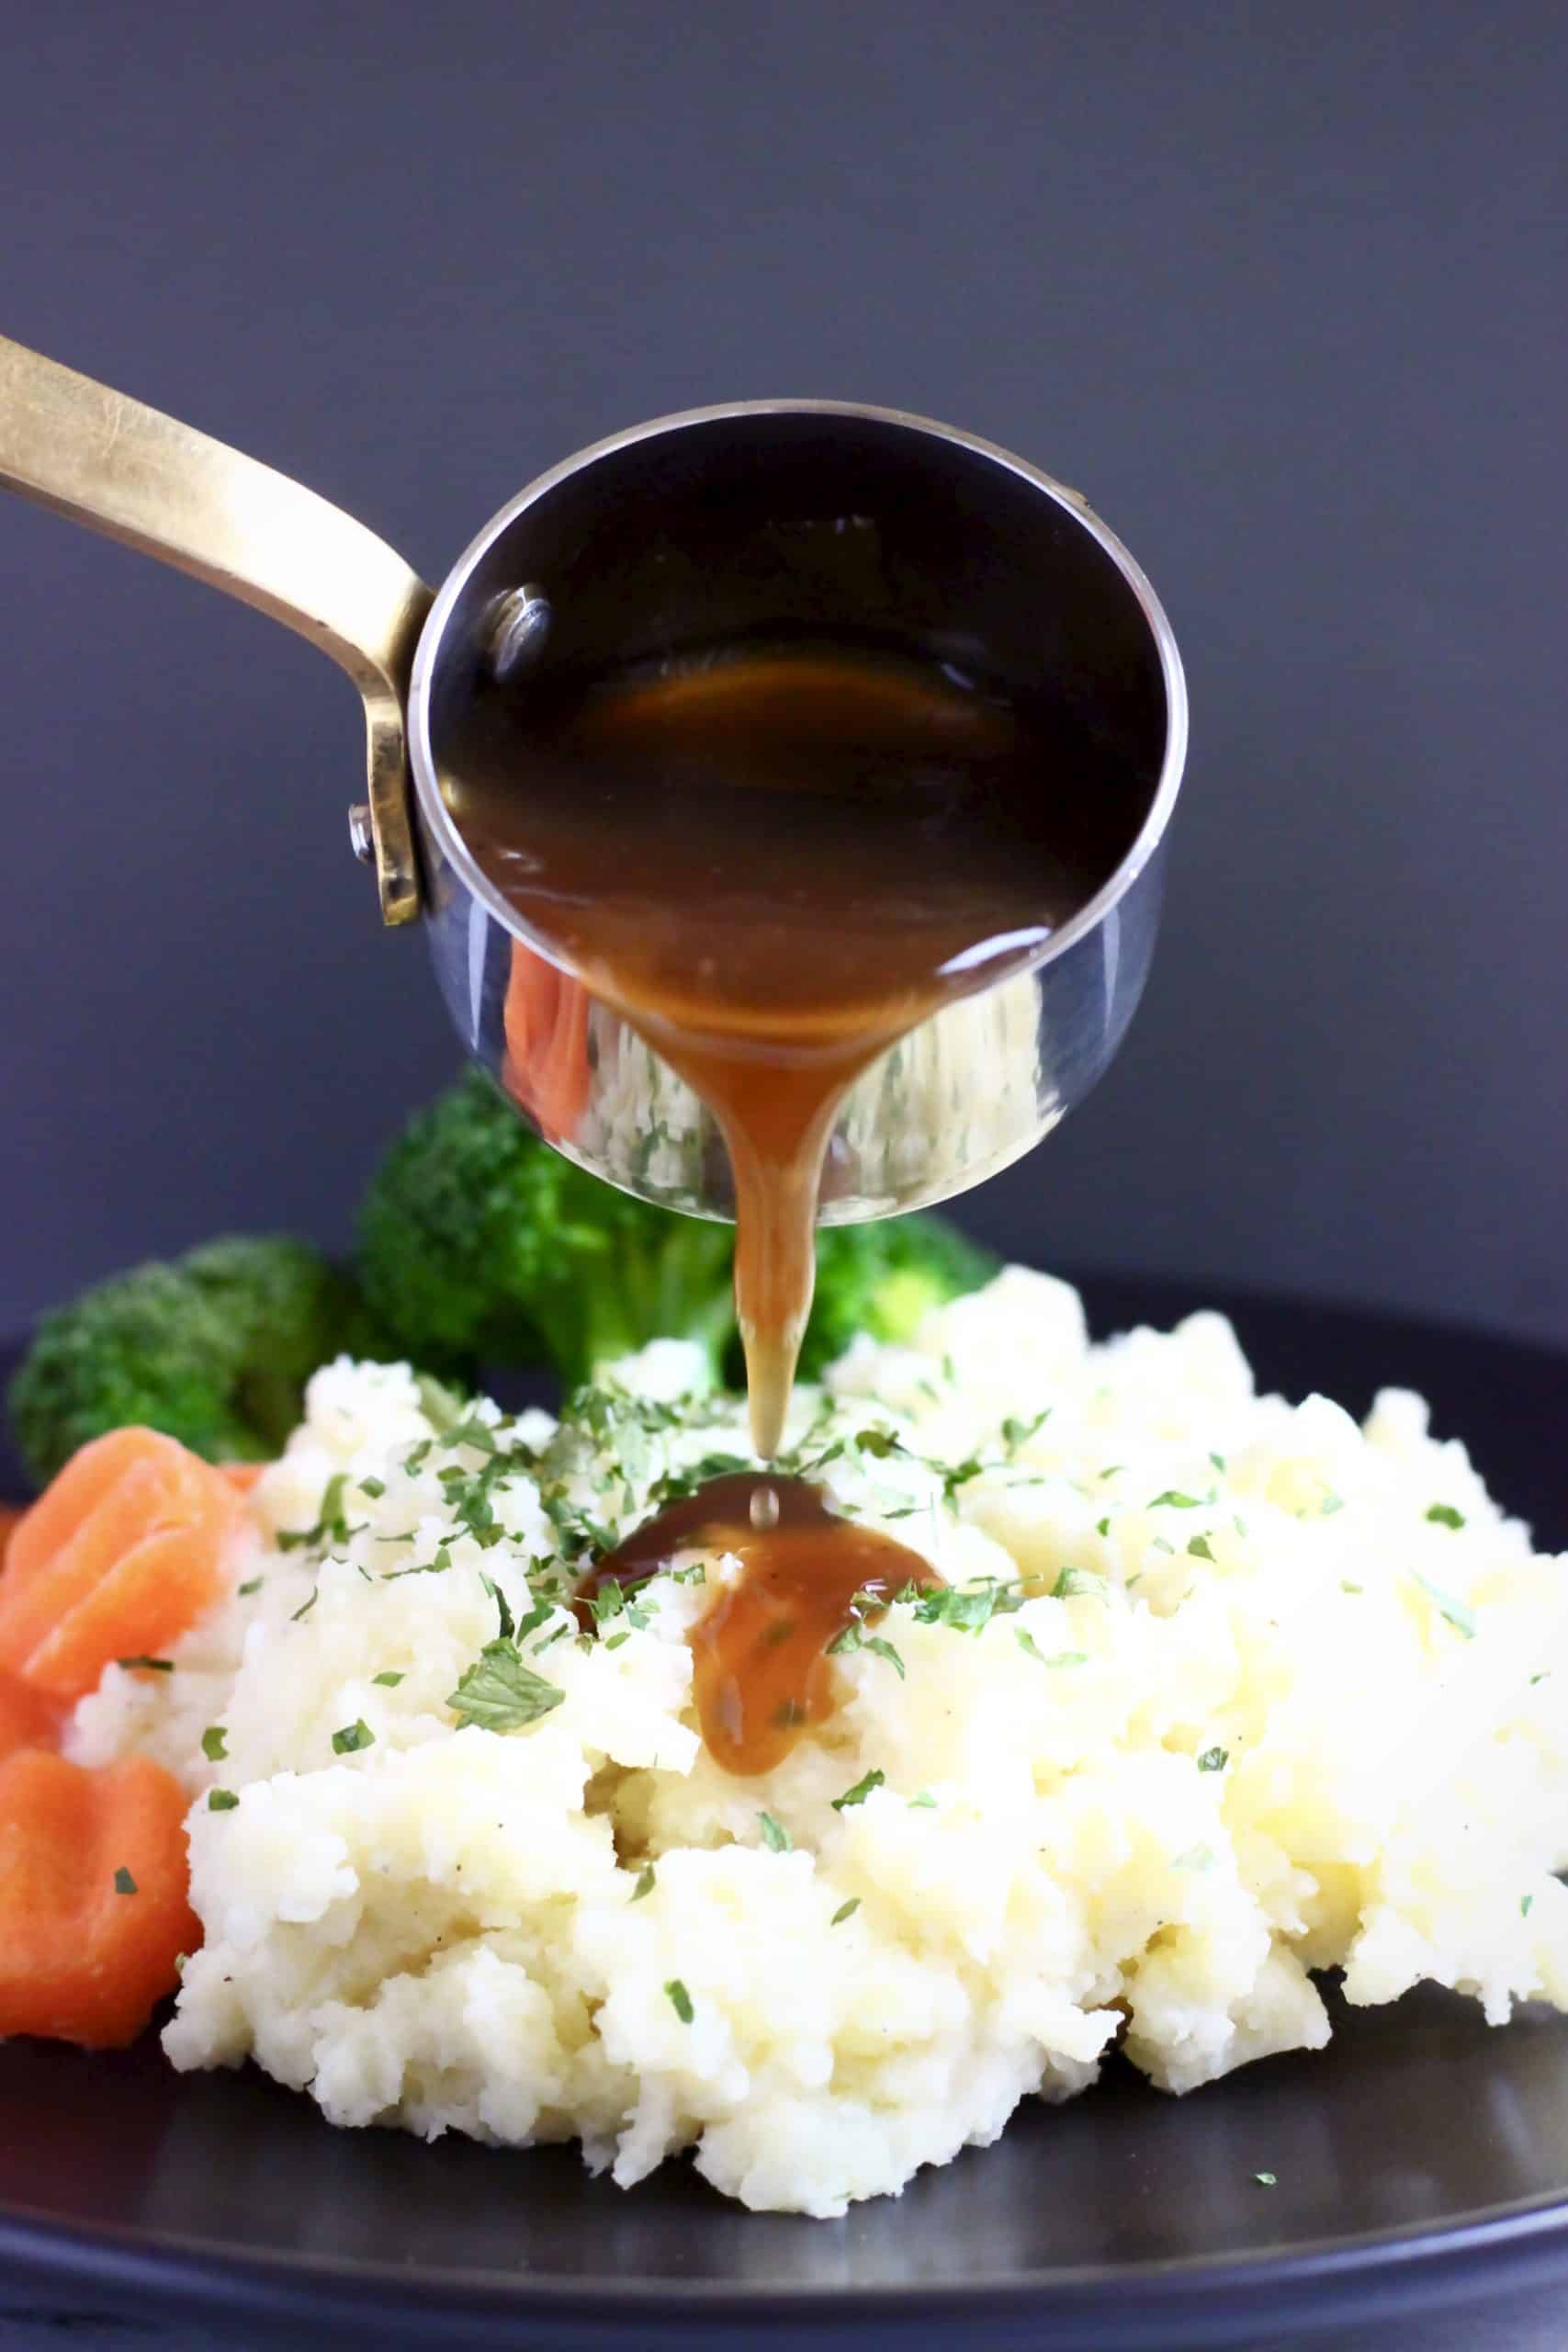 Mashed potatoes topped with green herbs with sliced carrots and broccoli on a black plate with brown gravy being poured over